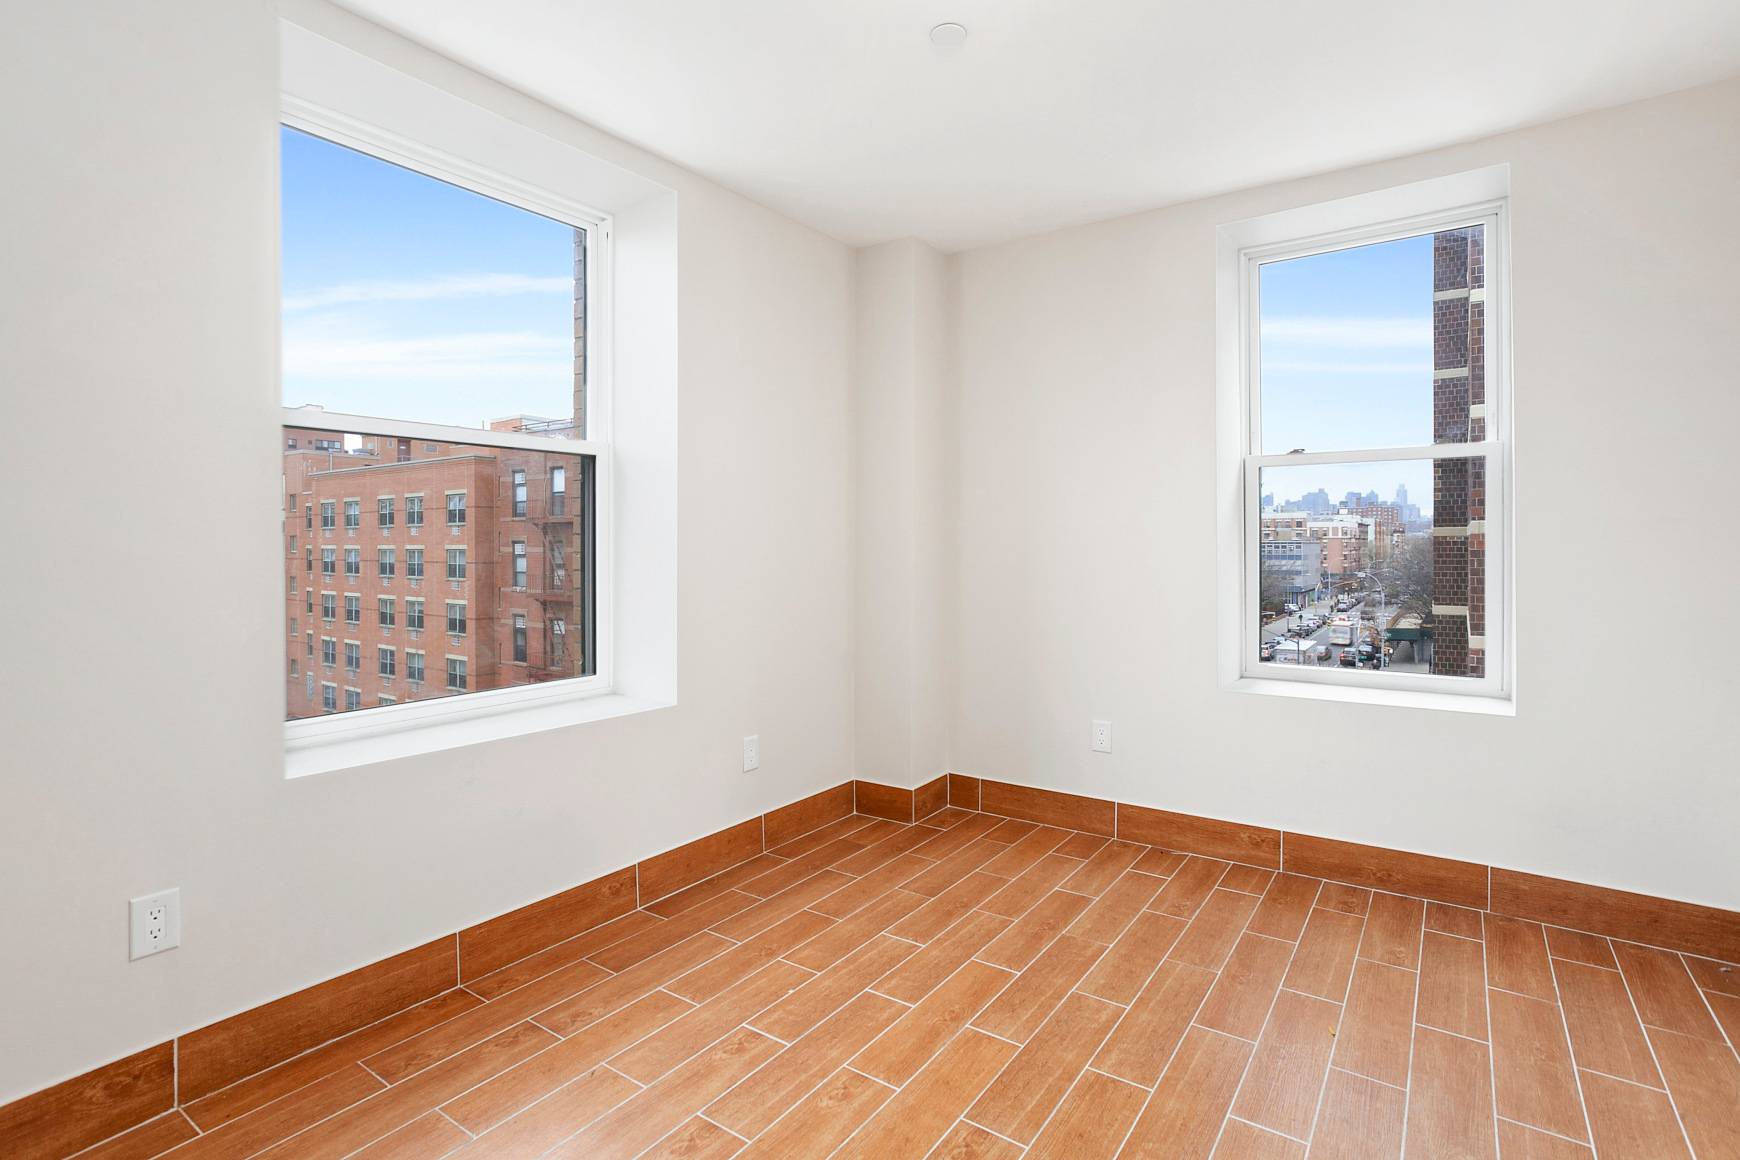 Easy showing, call to arrange a viewing for unit 3A, 4A or 6A Newly constructed 6 story boutique elevator building, with laundry in the building and a full time resident ...